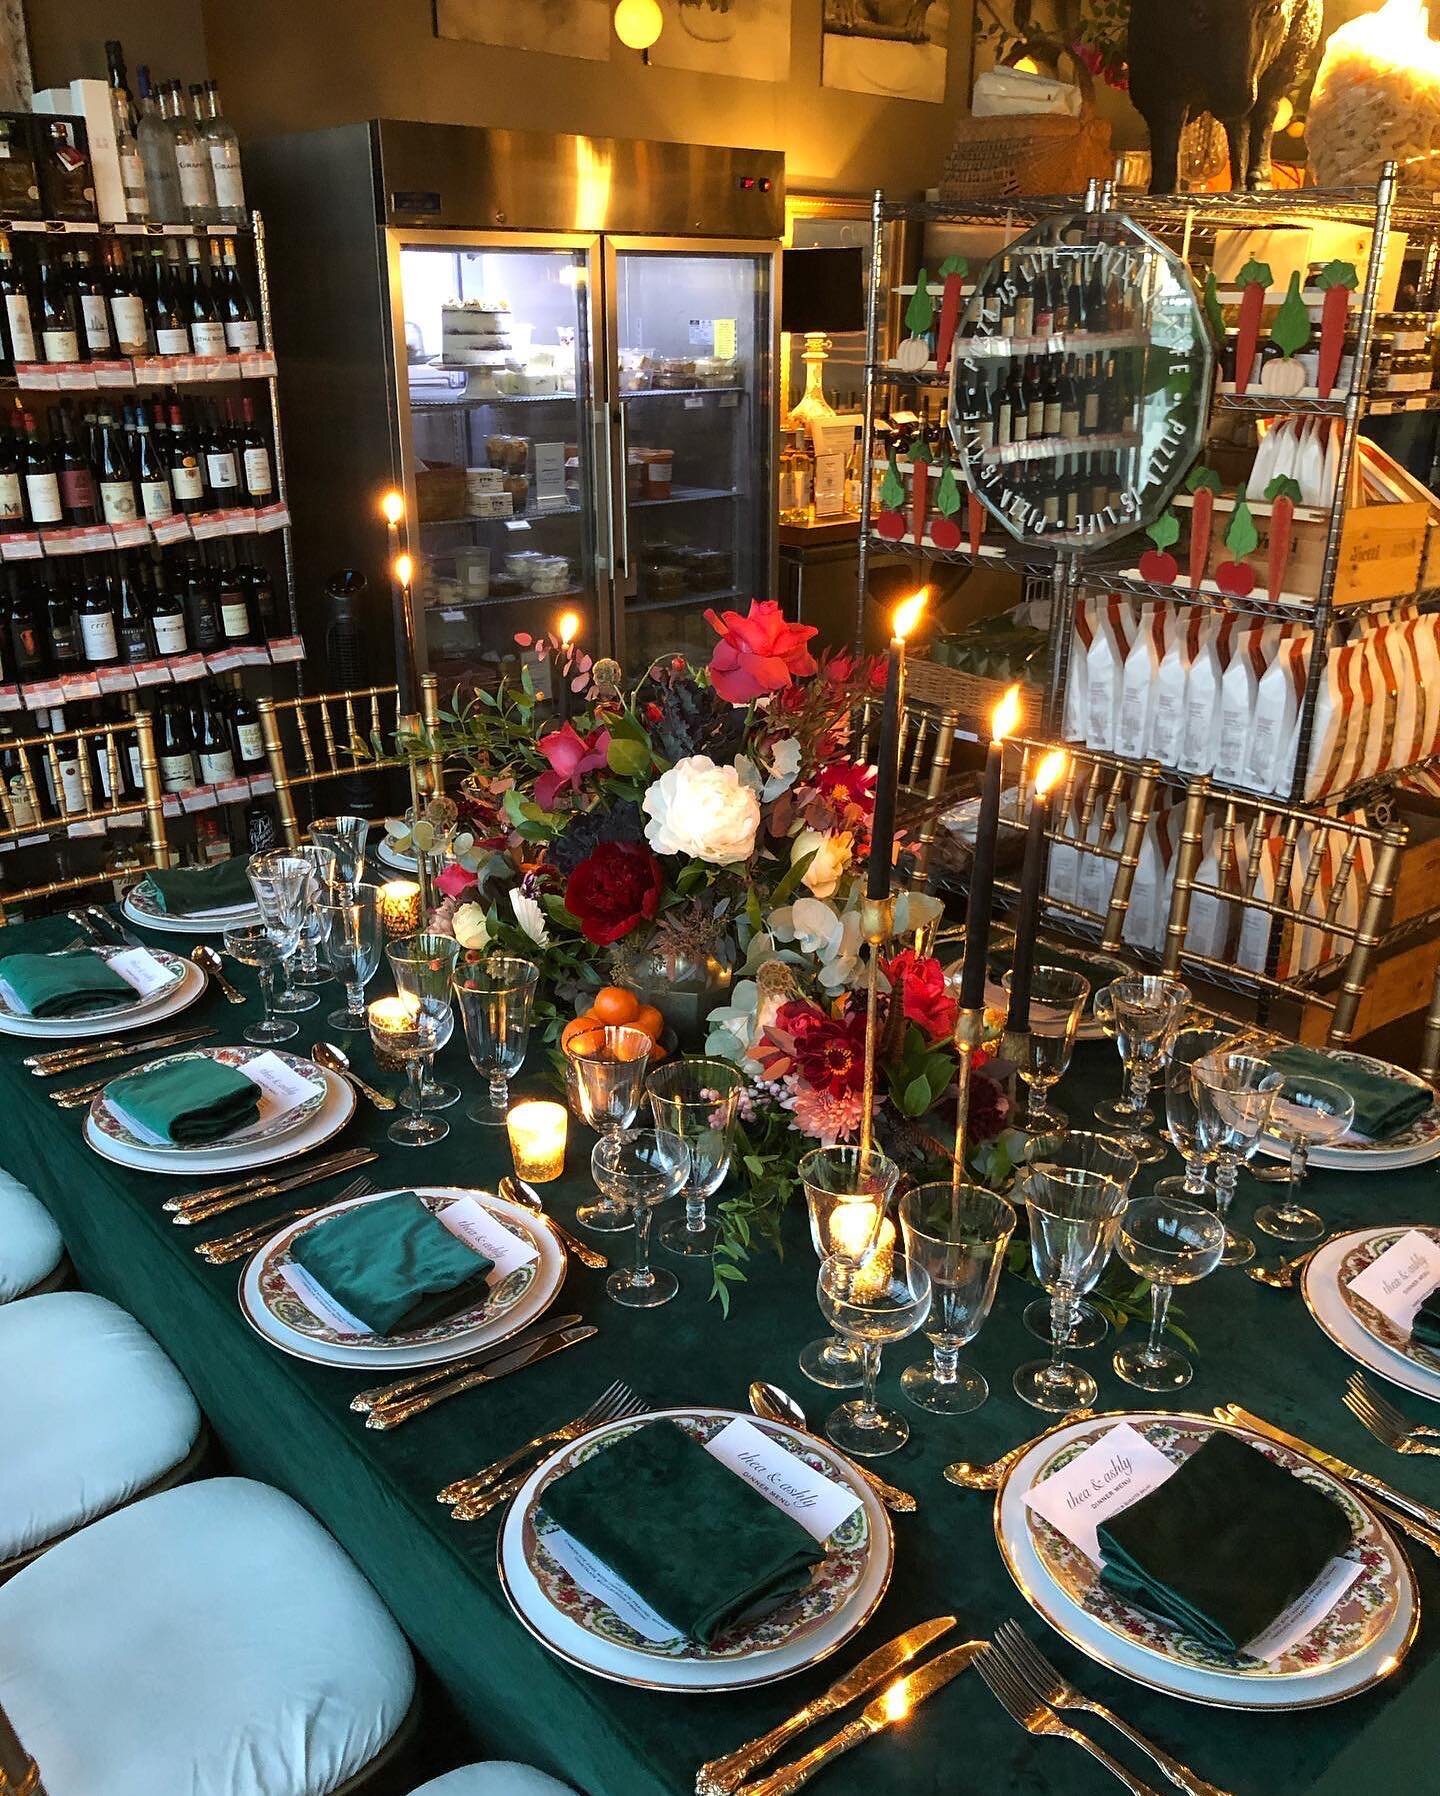 Did someone say @pisolinoitalianmarket DINNER PARTY?  Yes(!) we privatize the market for dinner parties!  From casual to formal, we customize everything from menus to decor.  Shown here is seating for 12. Max is 16.  Inquire within for your next cele